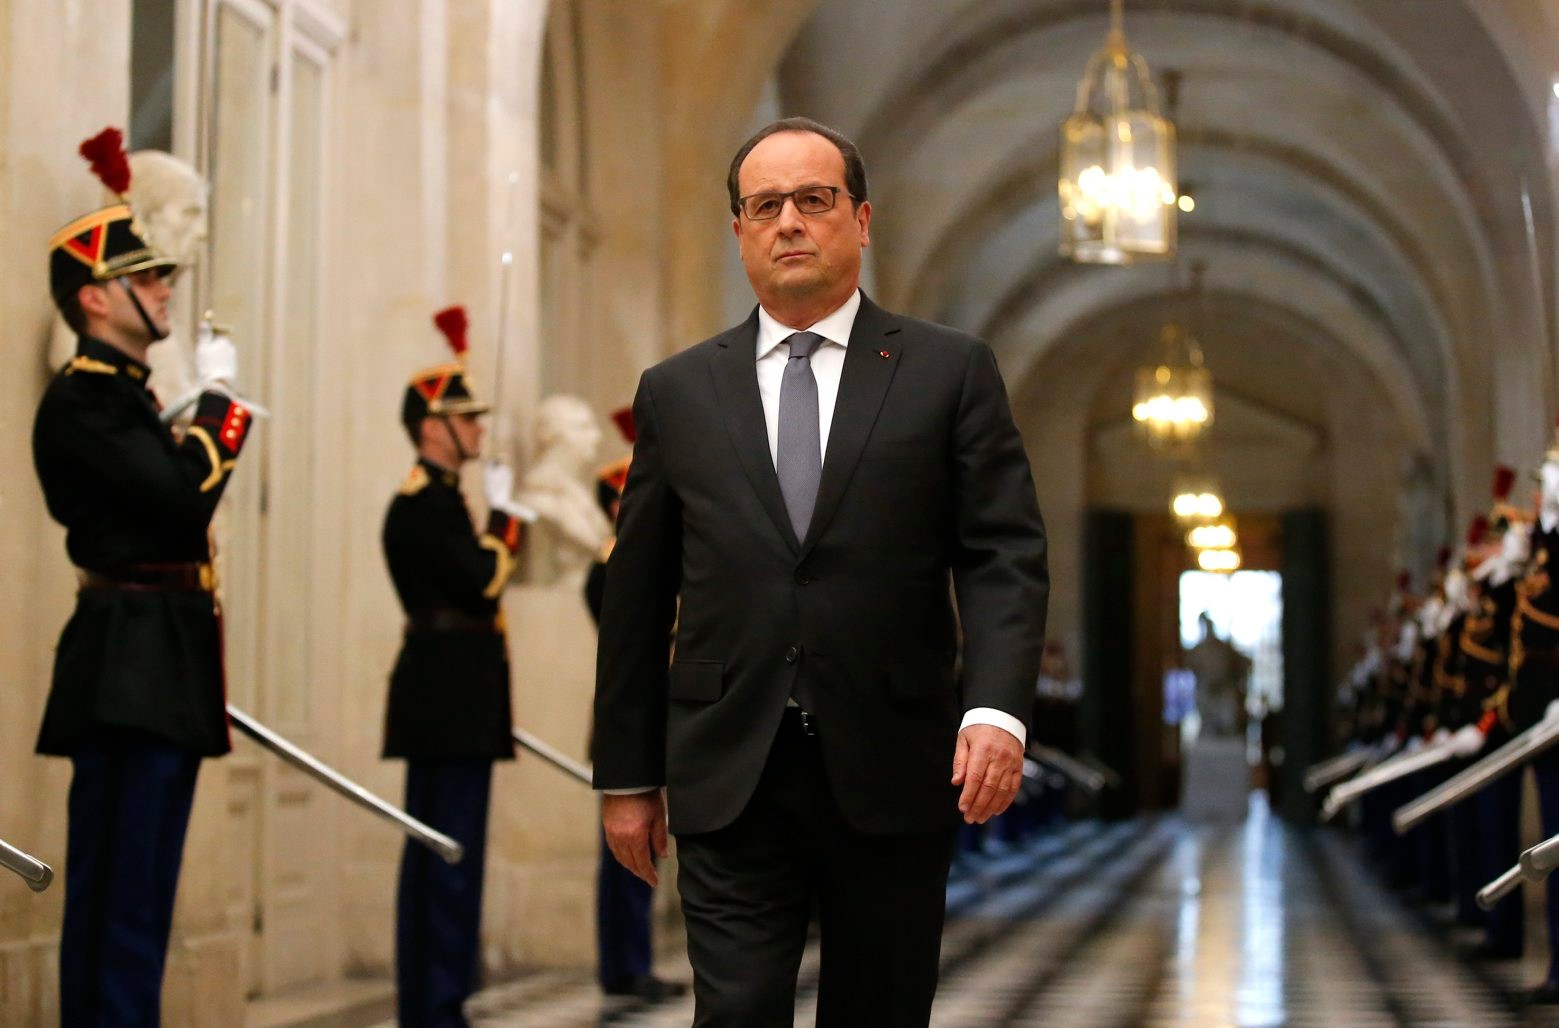 French President Francois Hollande arrives to deliver a speech at the Versailles castle, west of Paris, Monday, Nov.16, 2015. French President Francois Hollande is addressing parliament about France's response to the Paris attacks, in a rare speech to lawmakers gathered in the majestic congress room of the Palace of Versailles. (AP Photo/Michel Euler) France Paris Attacks